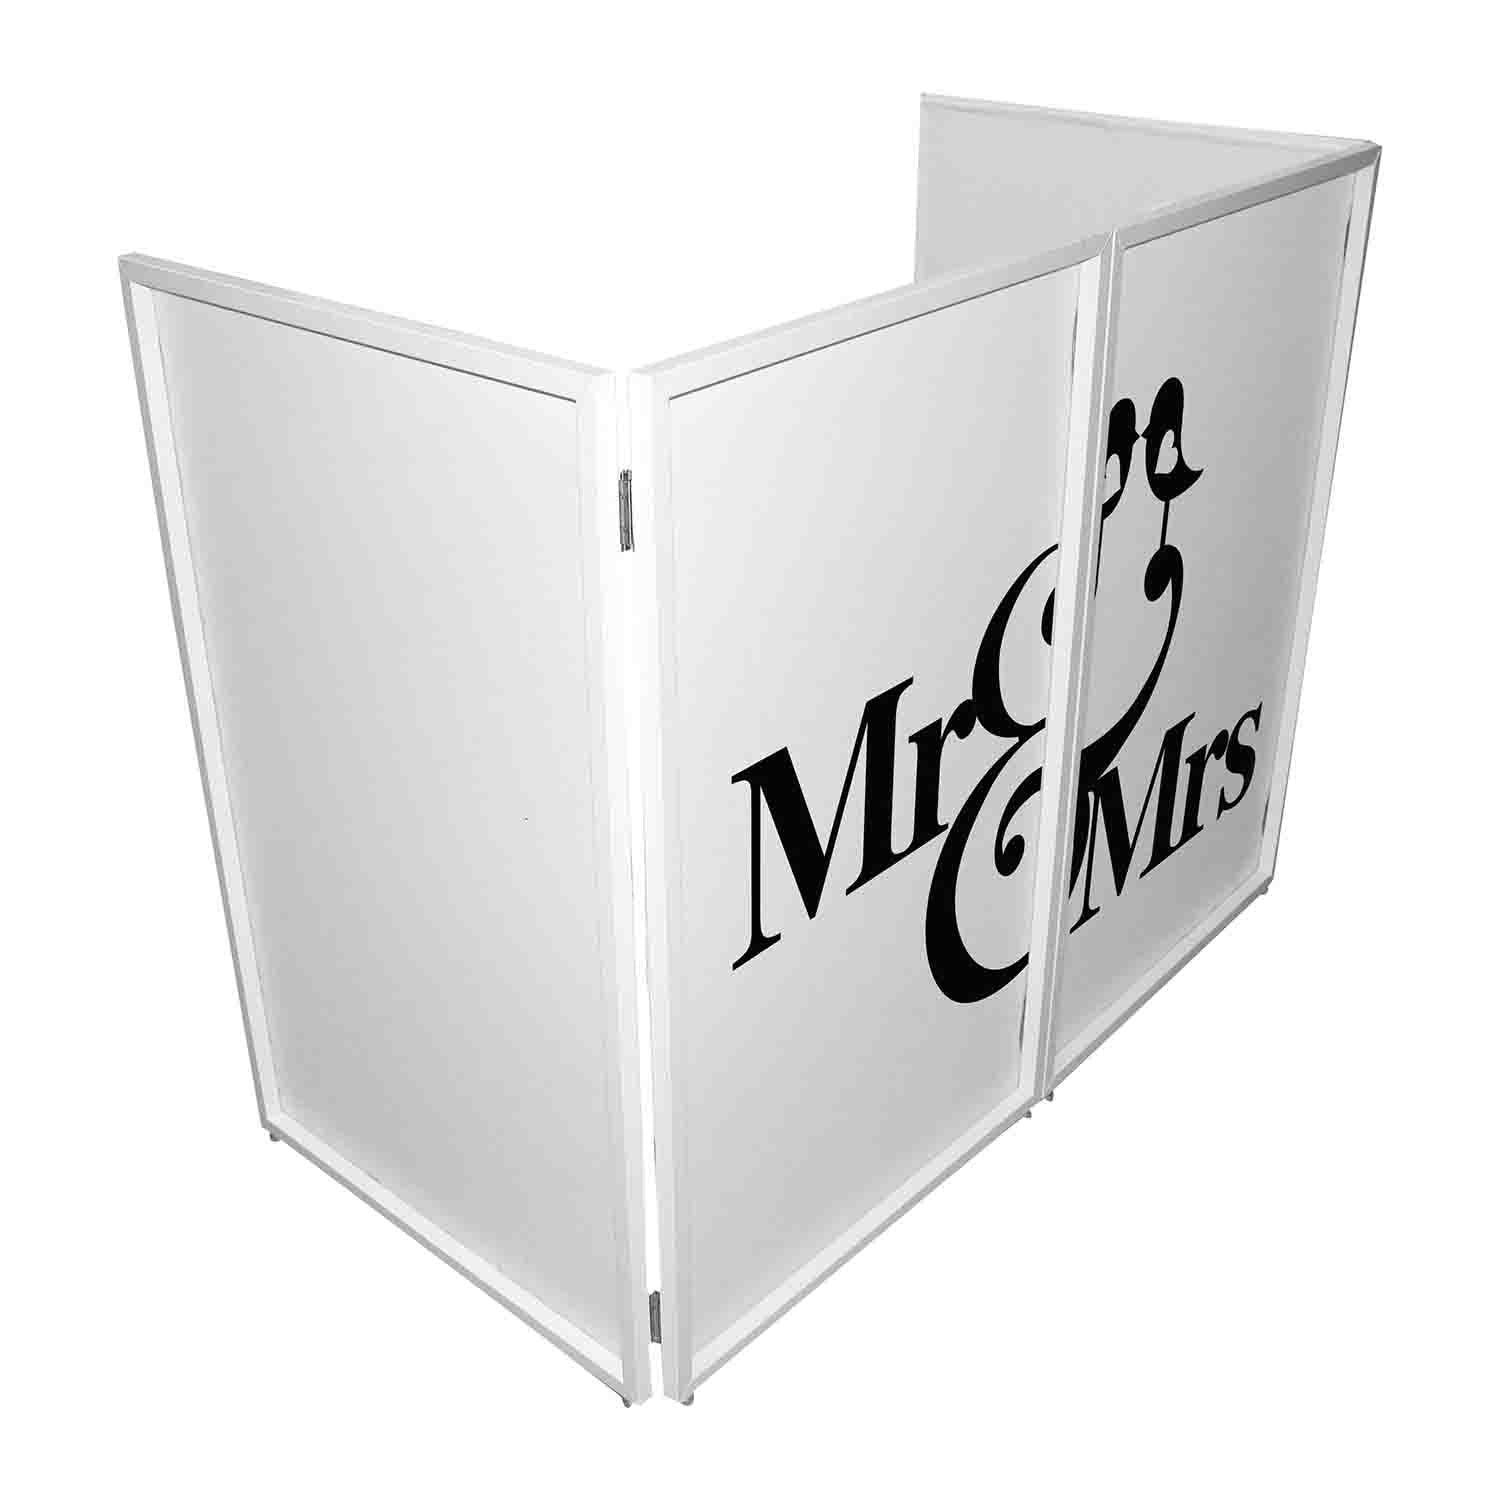 REPLACEMENT SCRIMS ProX XF-SMRMRS20X2 Set of Two Mr and Mrs Facade Enhancement Scrims - Black Script on White by ProX Cases